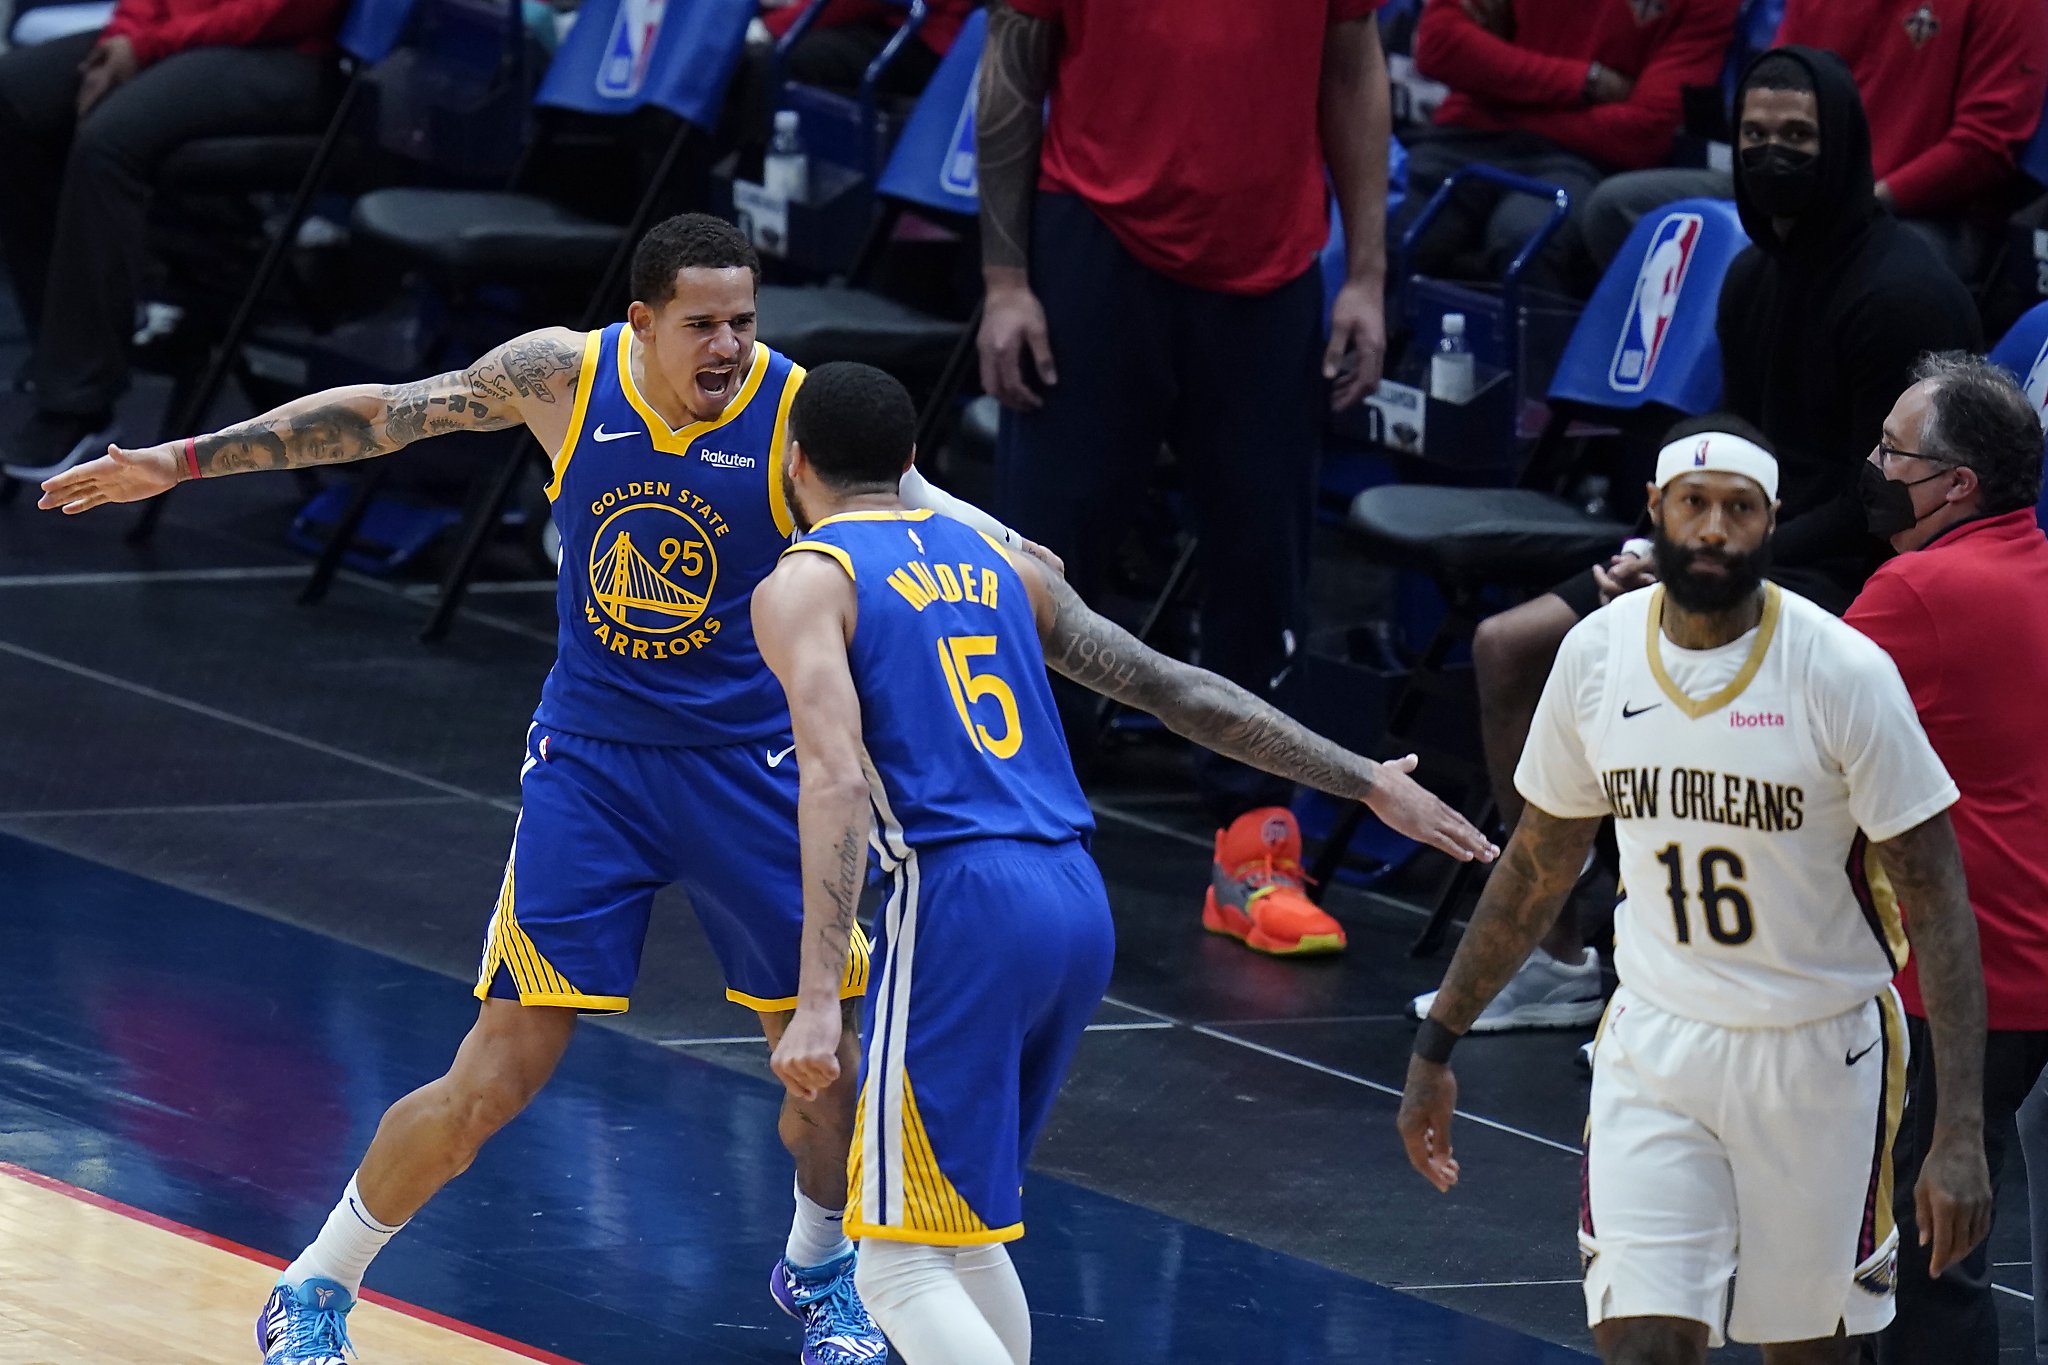 Warriors answer the call in convincing win over Pelicans